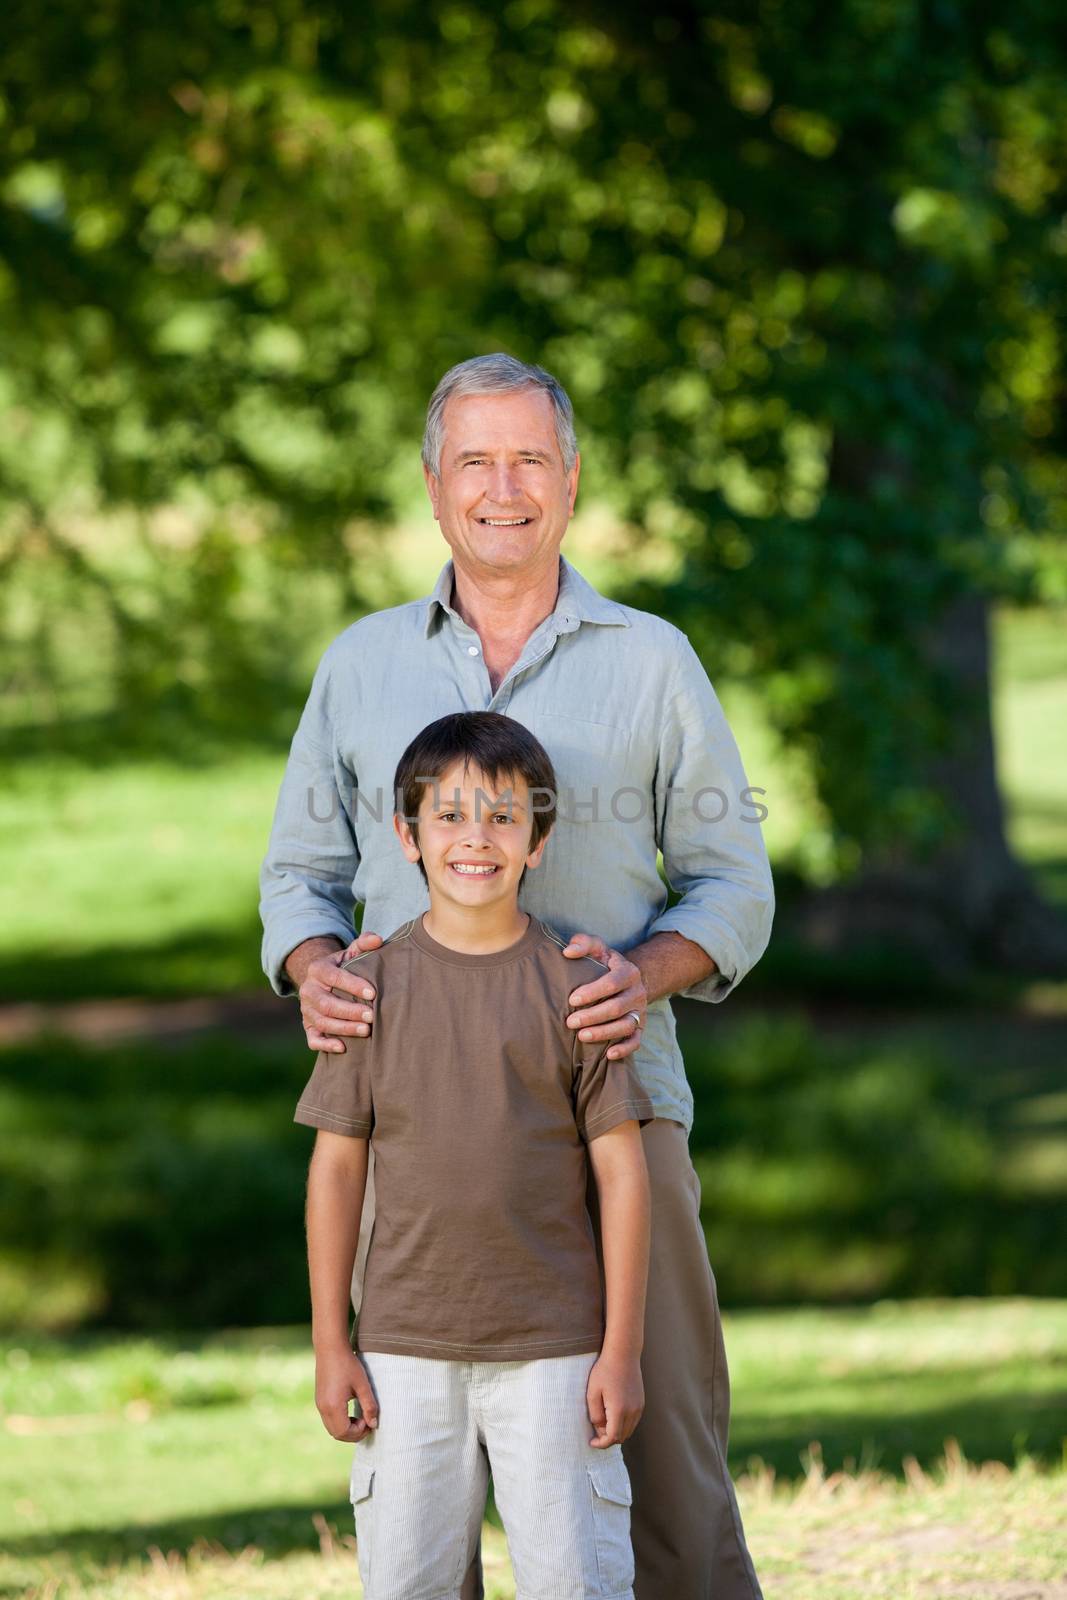 Grandather and his grandson looking at the camera in the park by Wavebreakmedia